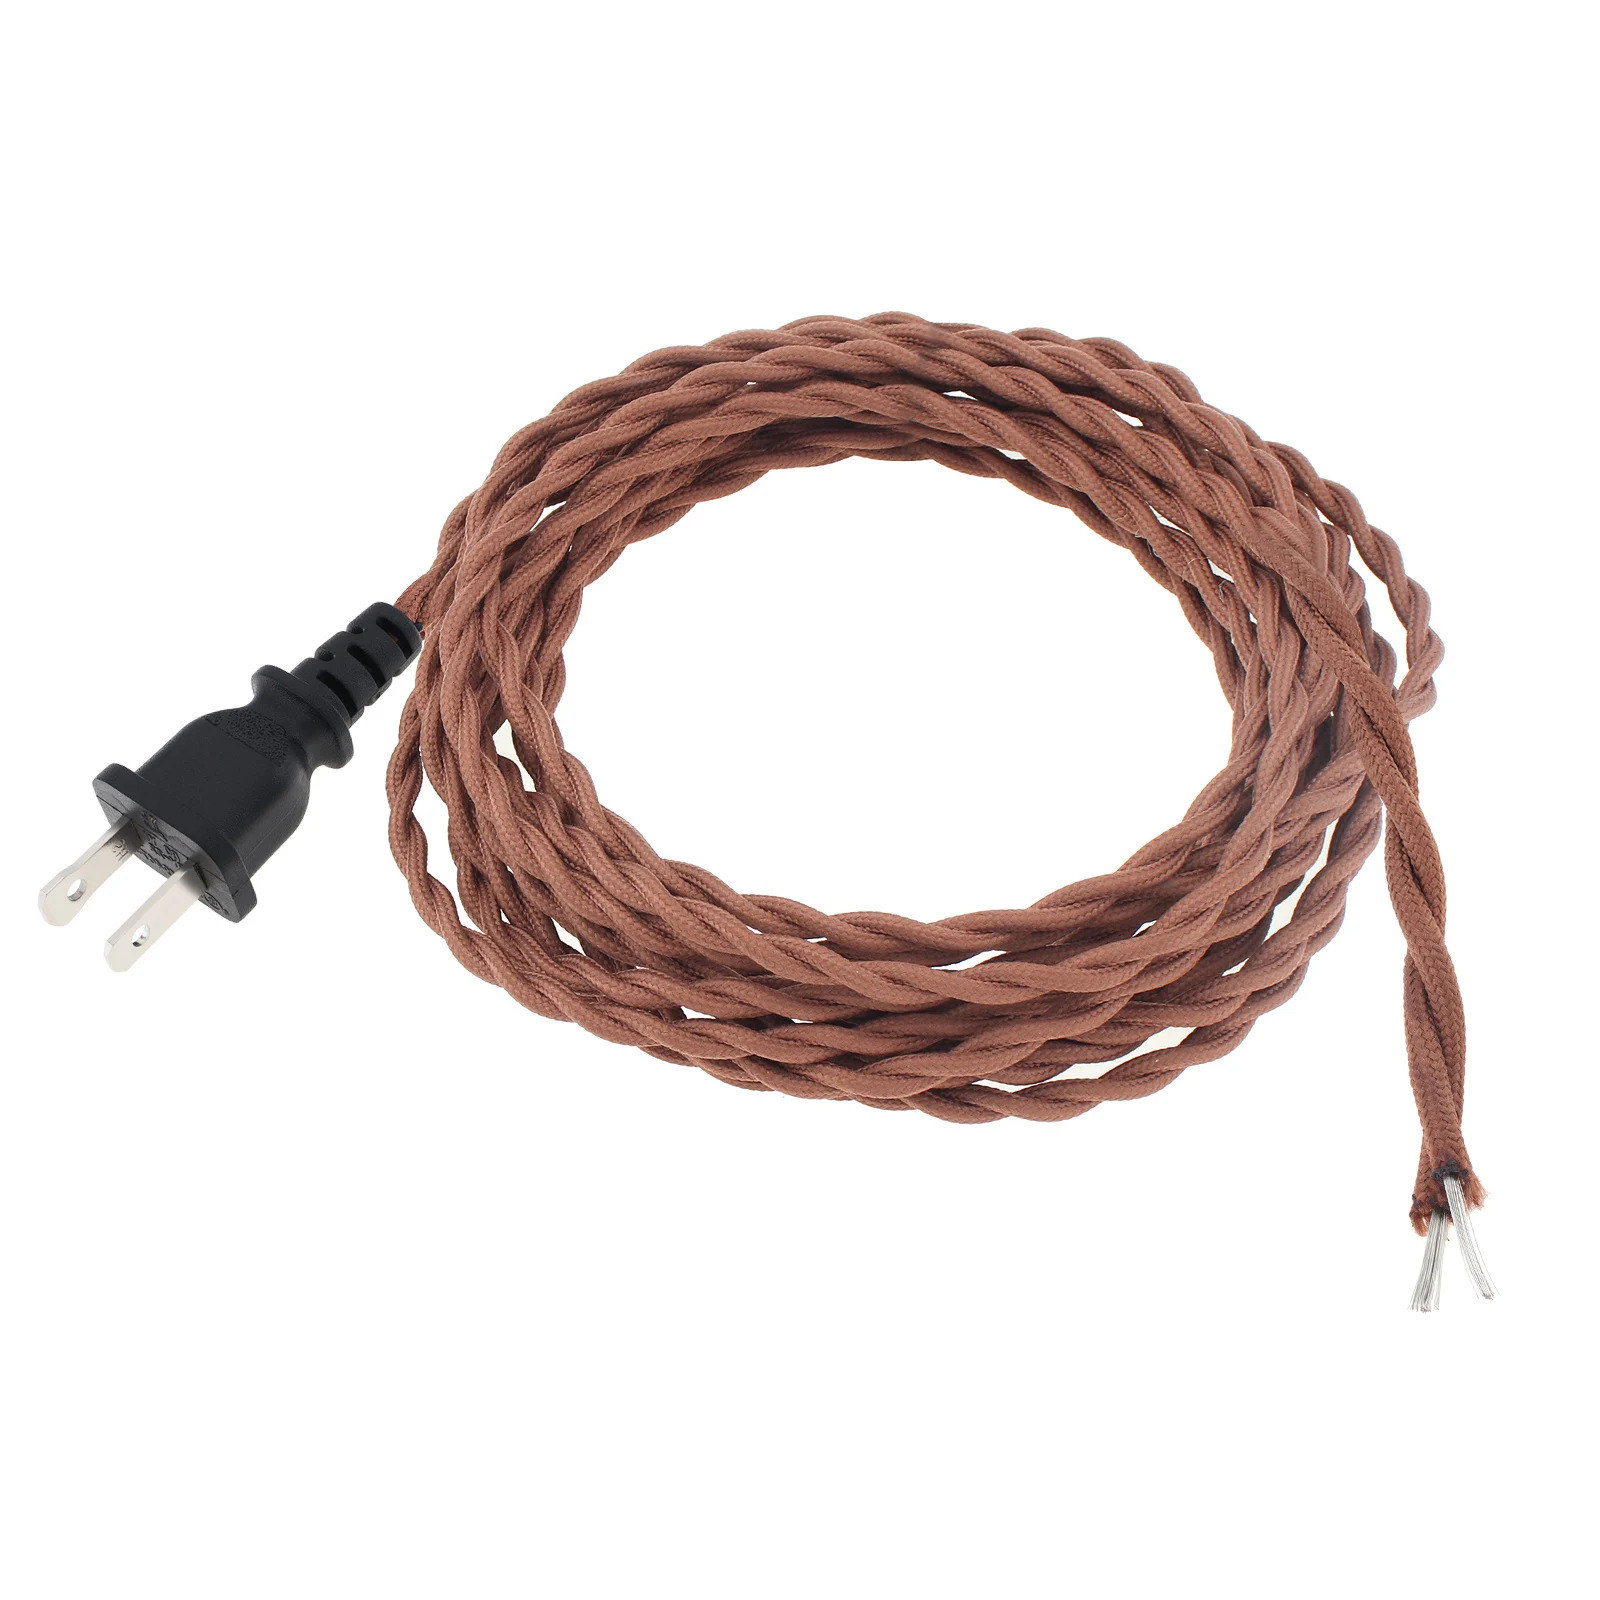 3.6M/12FT Twisted Cloth Covered Lamp Cord Replacement Extension Industrial for DIY Projects Retro Lamp with US End Plug projects